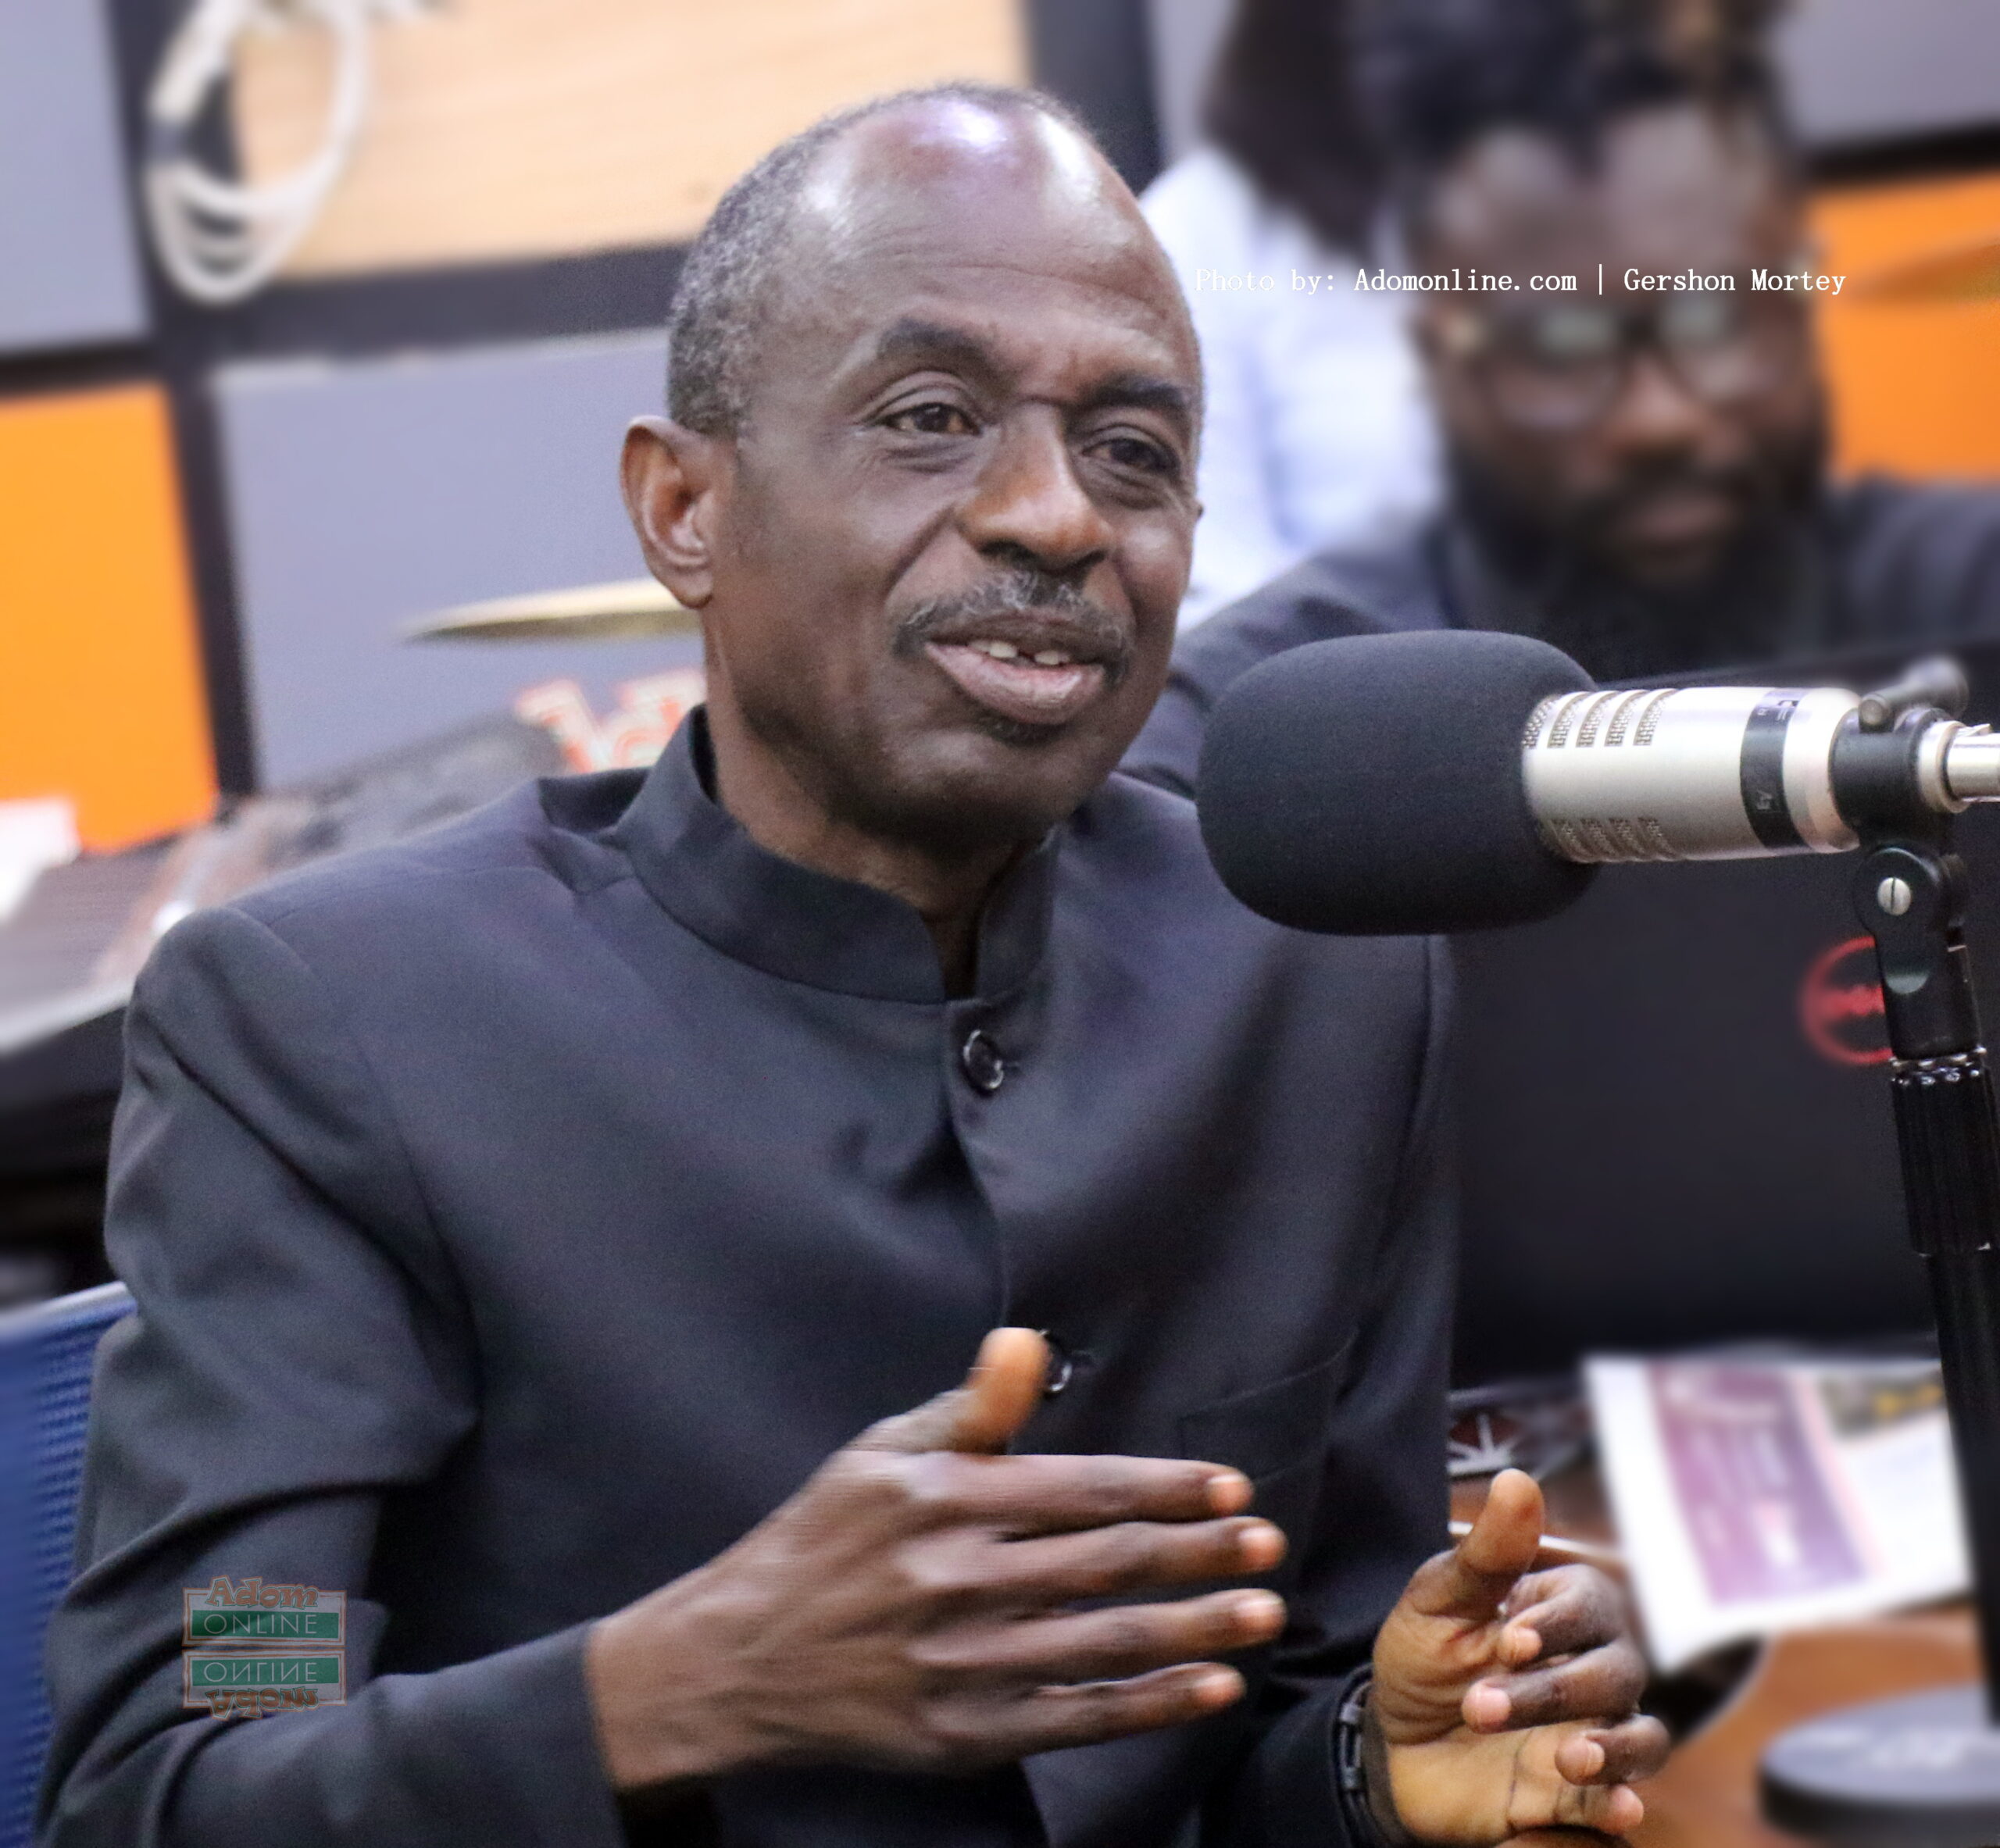 You have your E-levy, solve the problems – Asiedu Nketia tells Gov’t